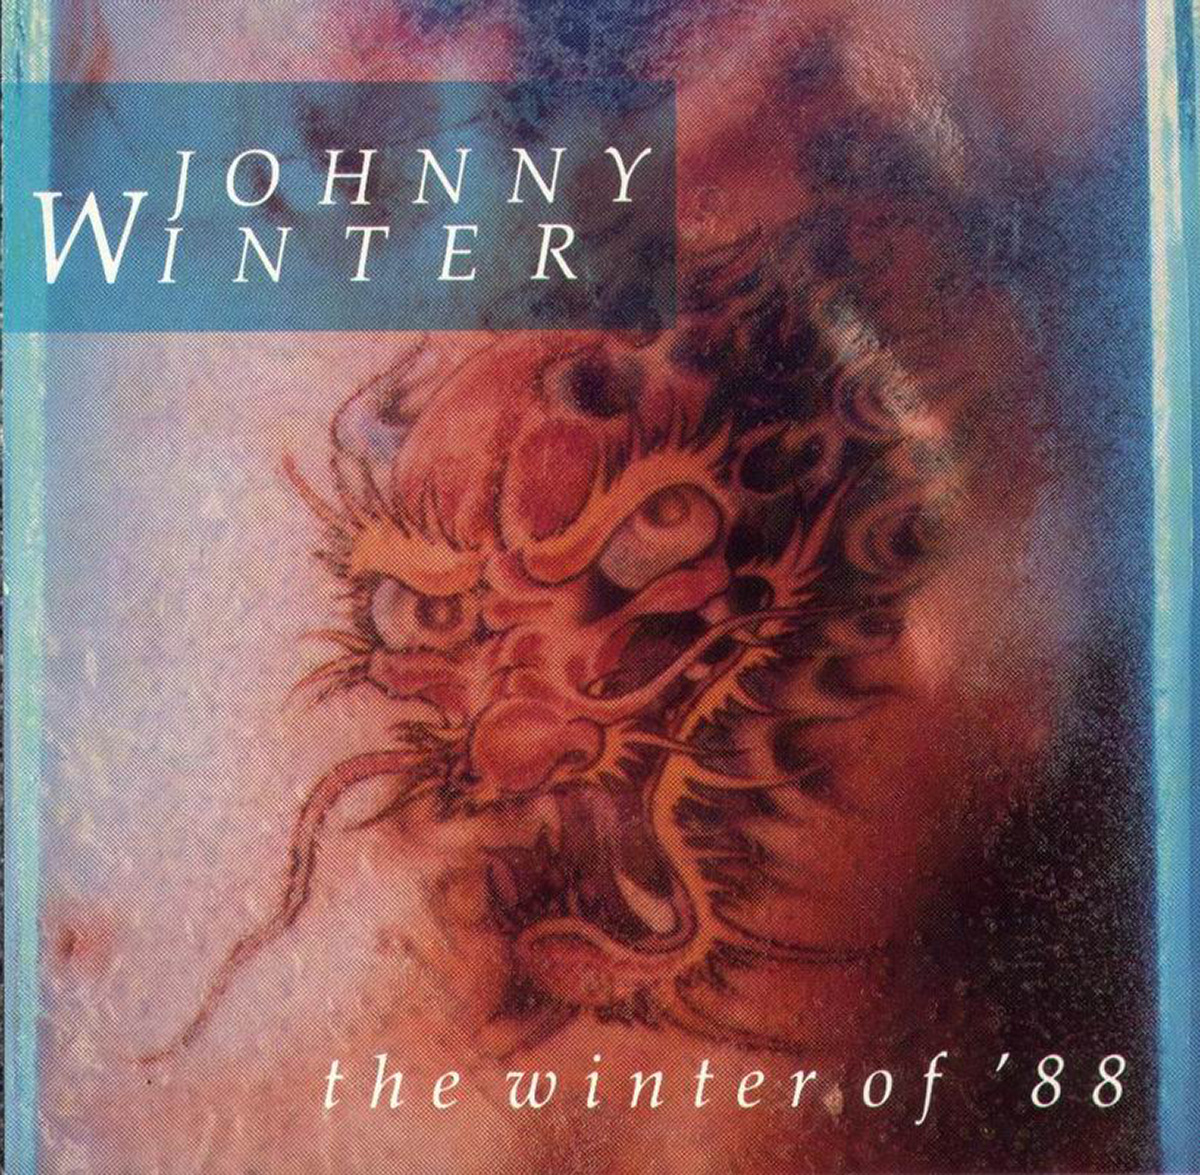 JOHNNY WINTER - Winter of '88 front cover photo https://vinyl-records.nl